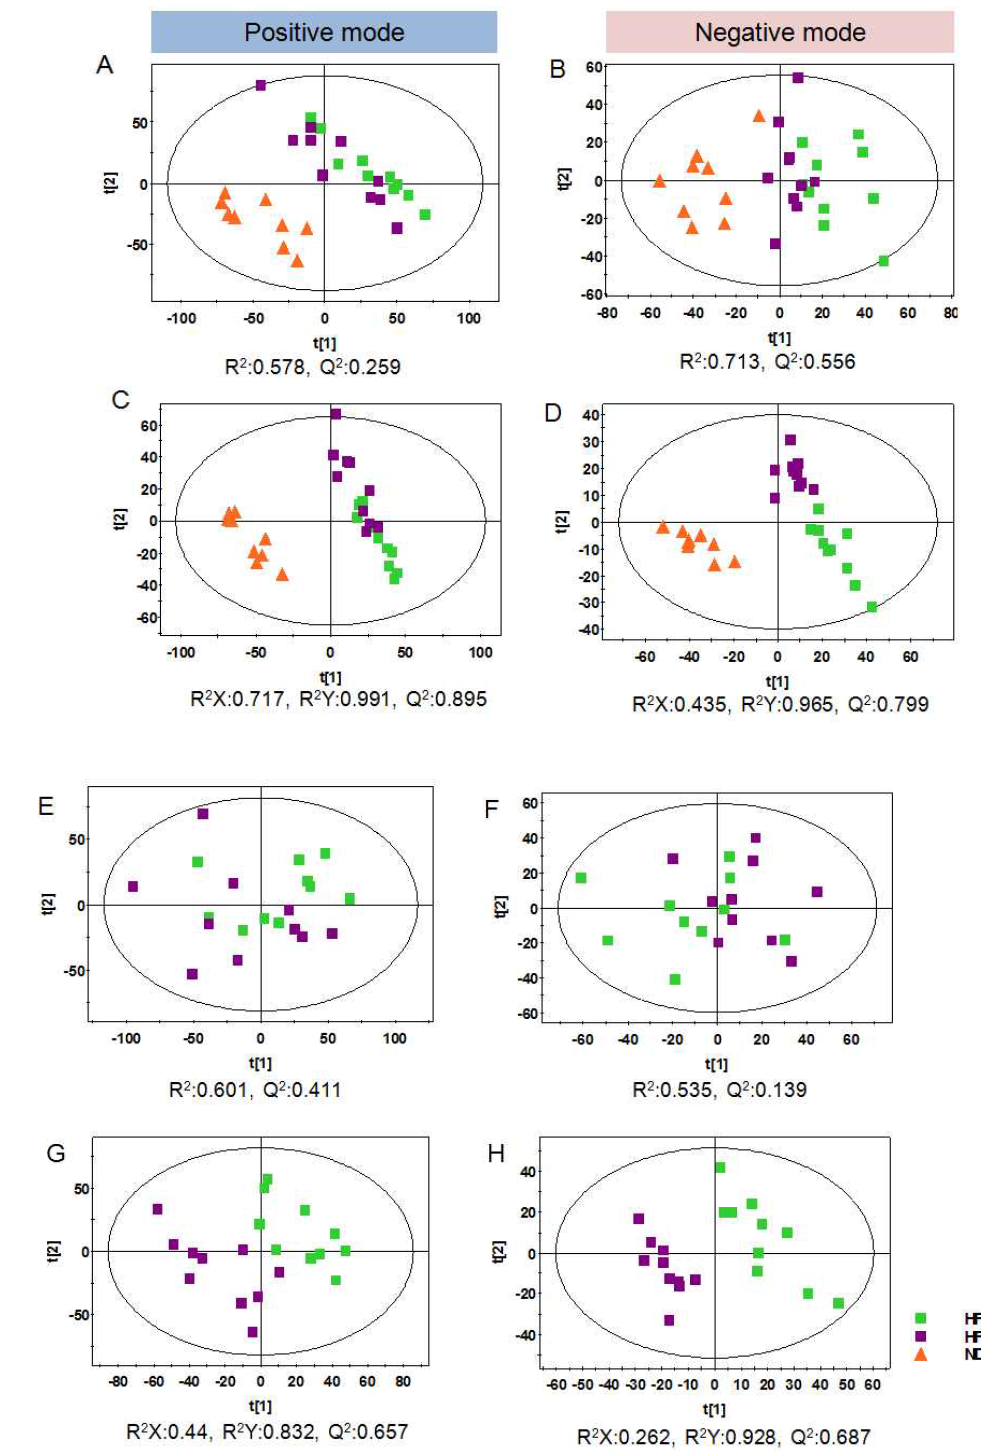 Principal component analysis (PCA), partial least squares-discriminant analysis (PLS-DA) score scatter plots obtained from the UPLC/Q-TOF MS spectra of liver lipid extract for global analysis, which is demonstrating a clear differentiation among the groups